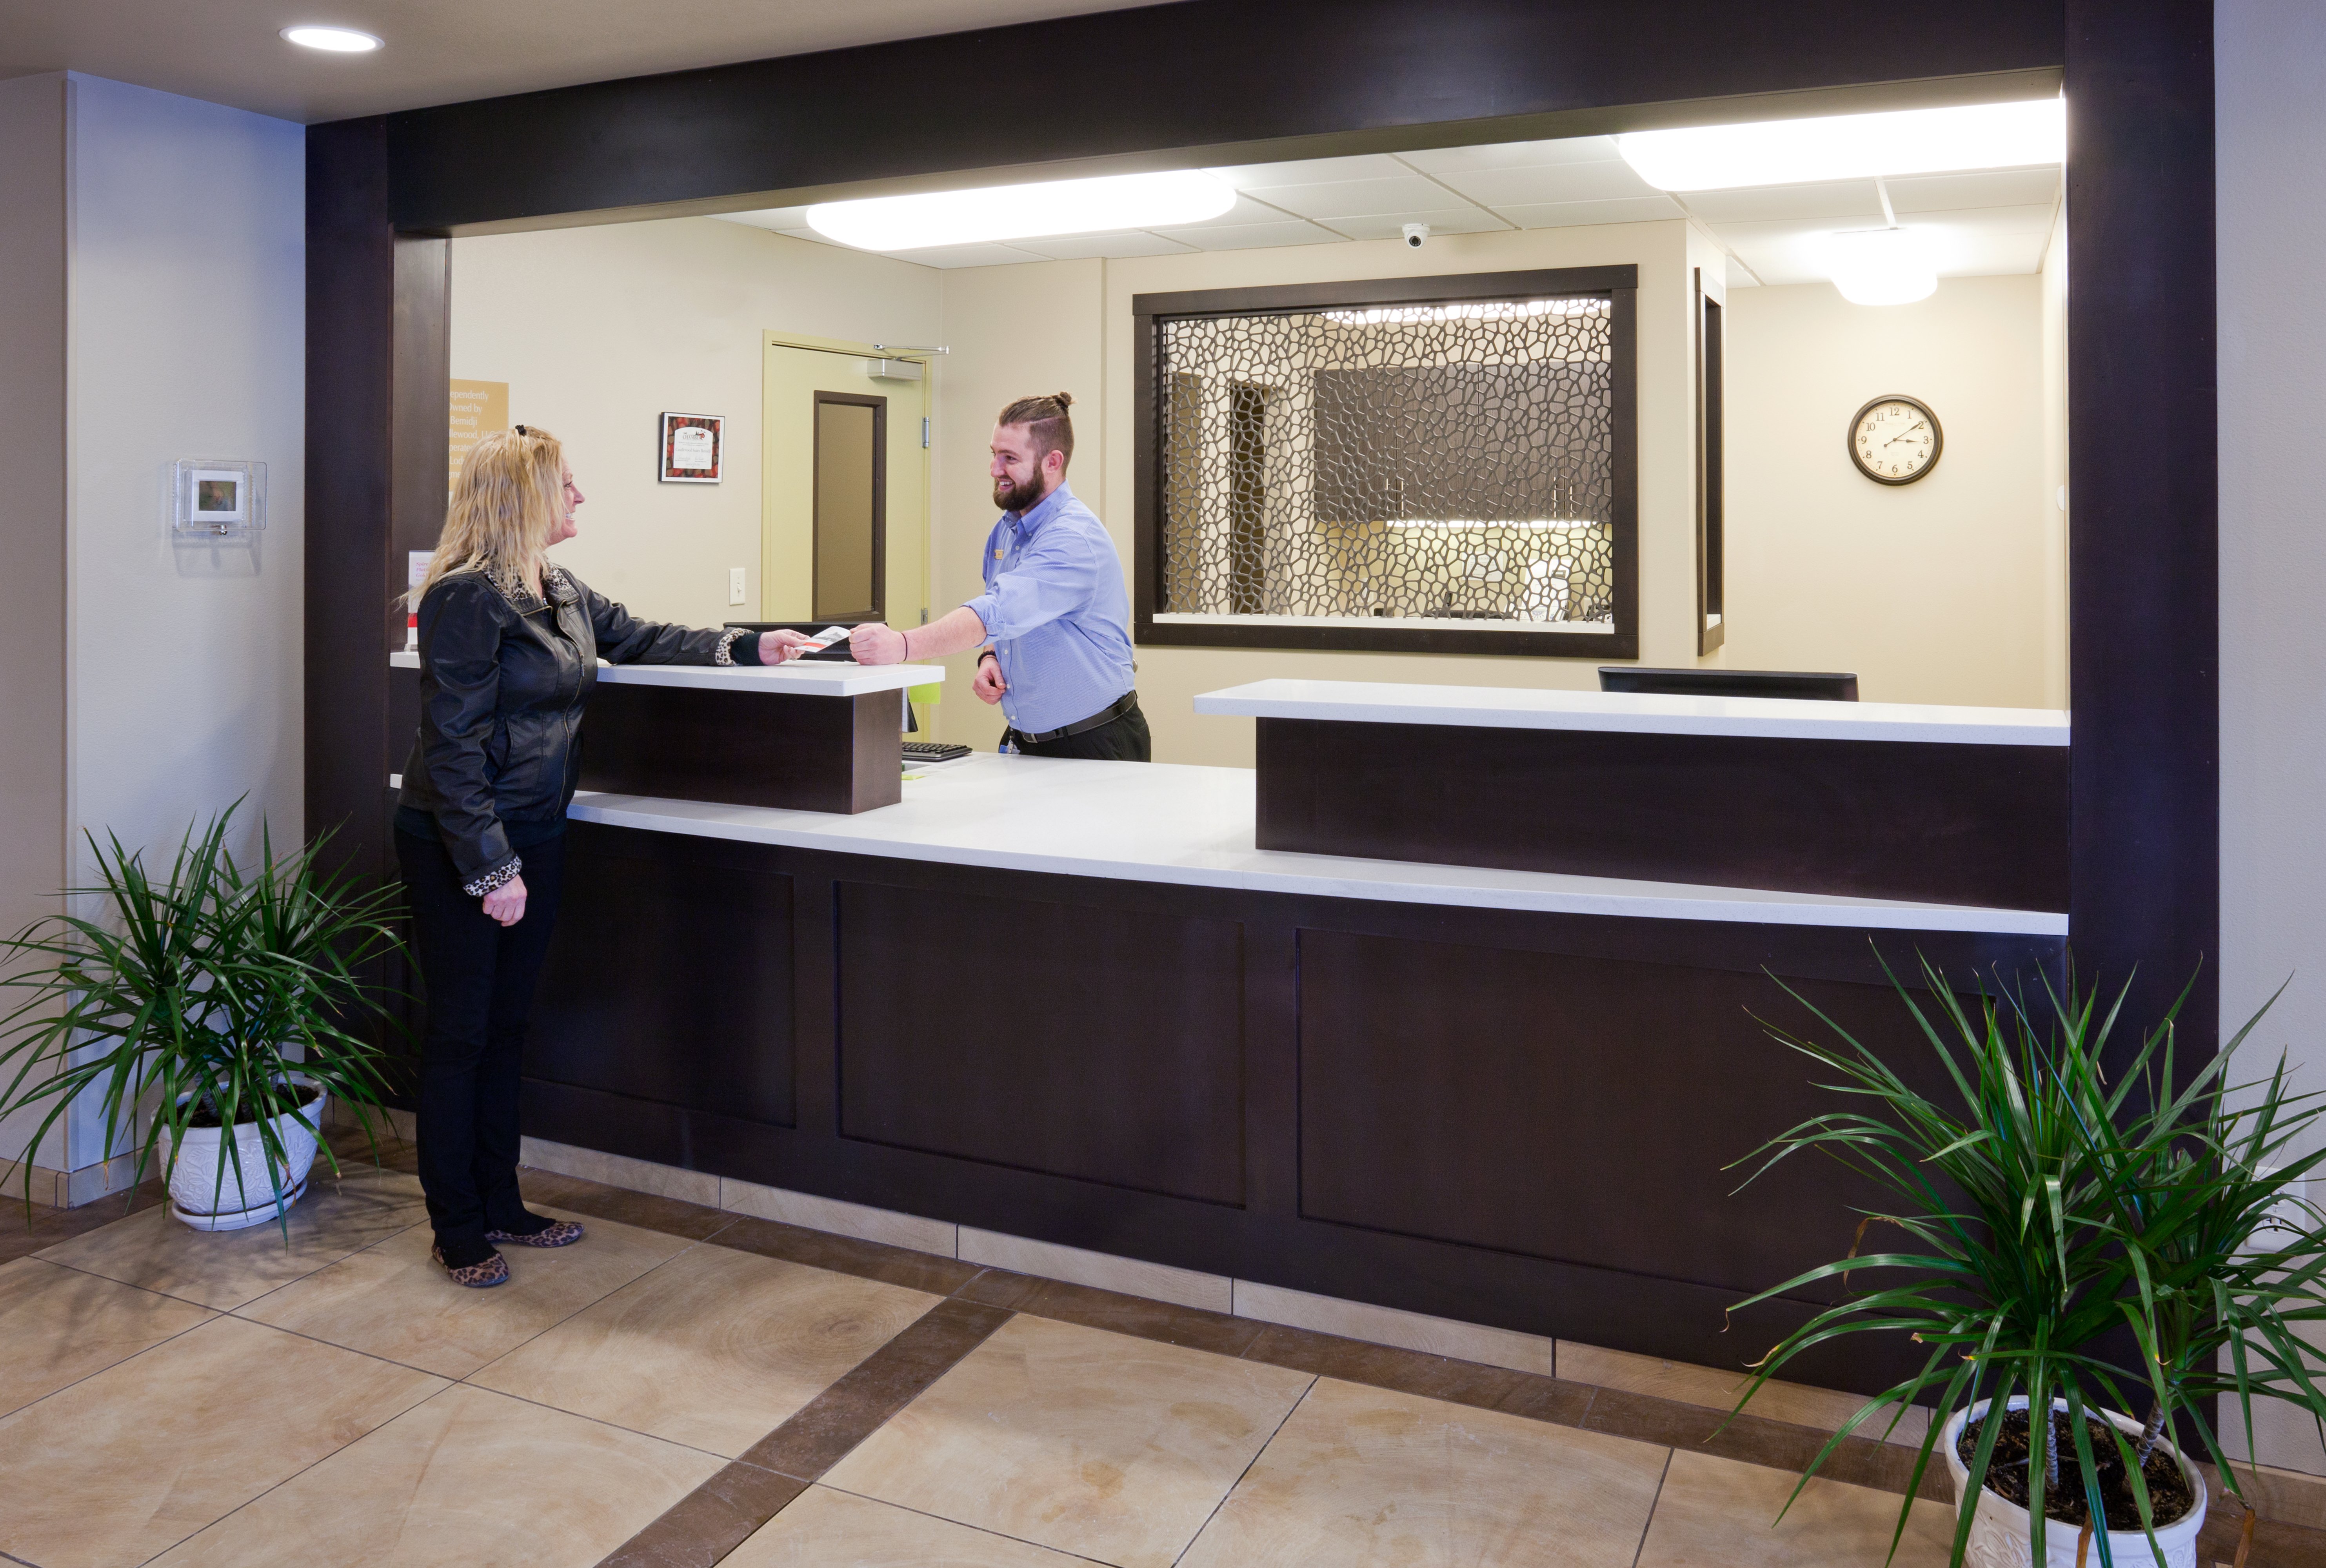 Our friendly staff awaits to welcome you to the Bemidji Candlewood